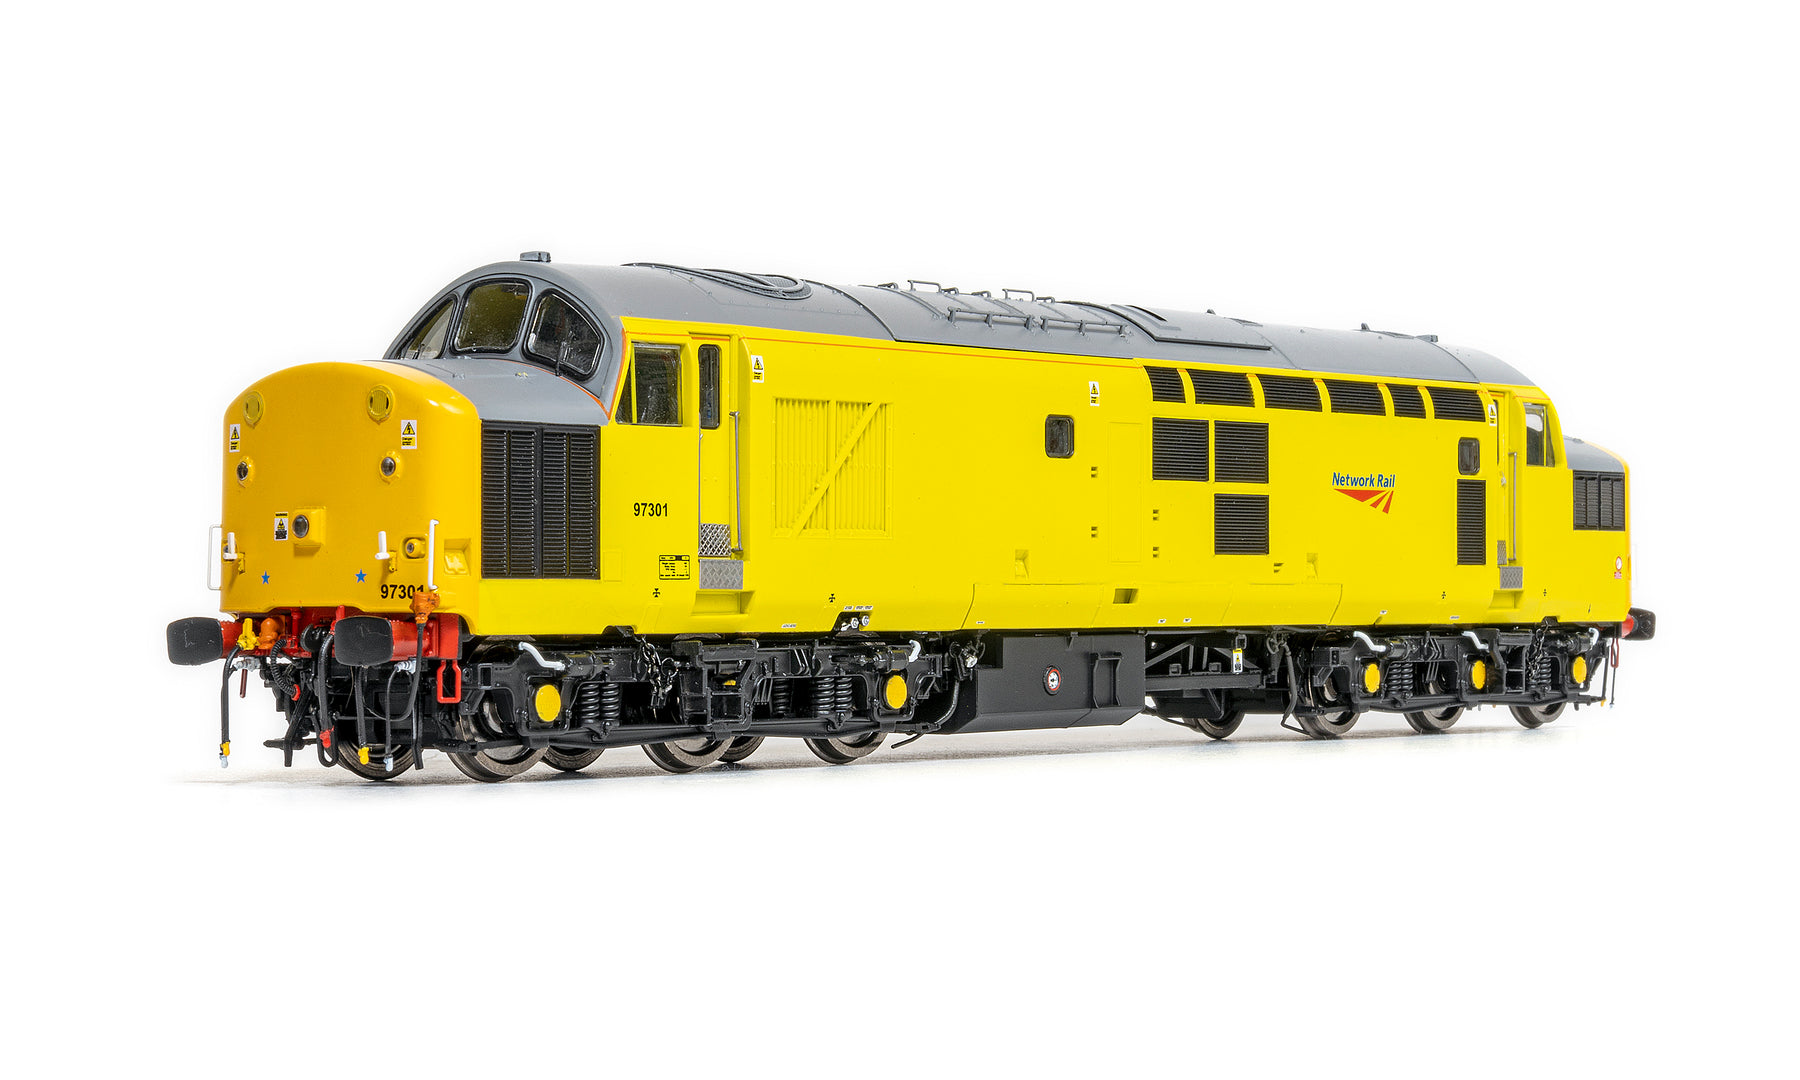 First Class 37 Decorated Sample Revealed!